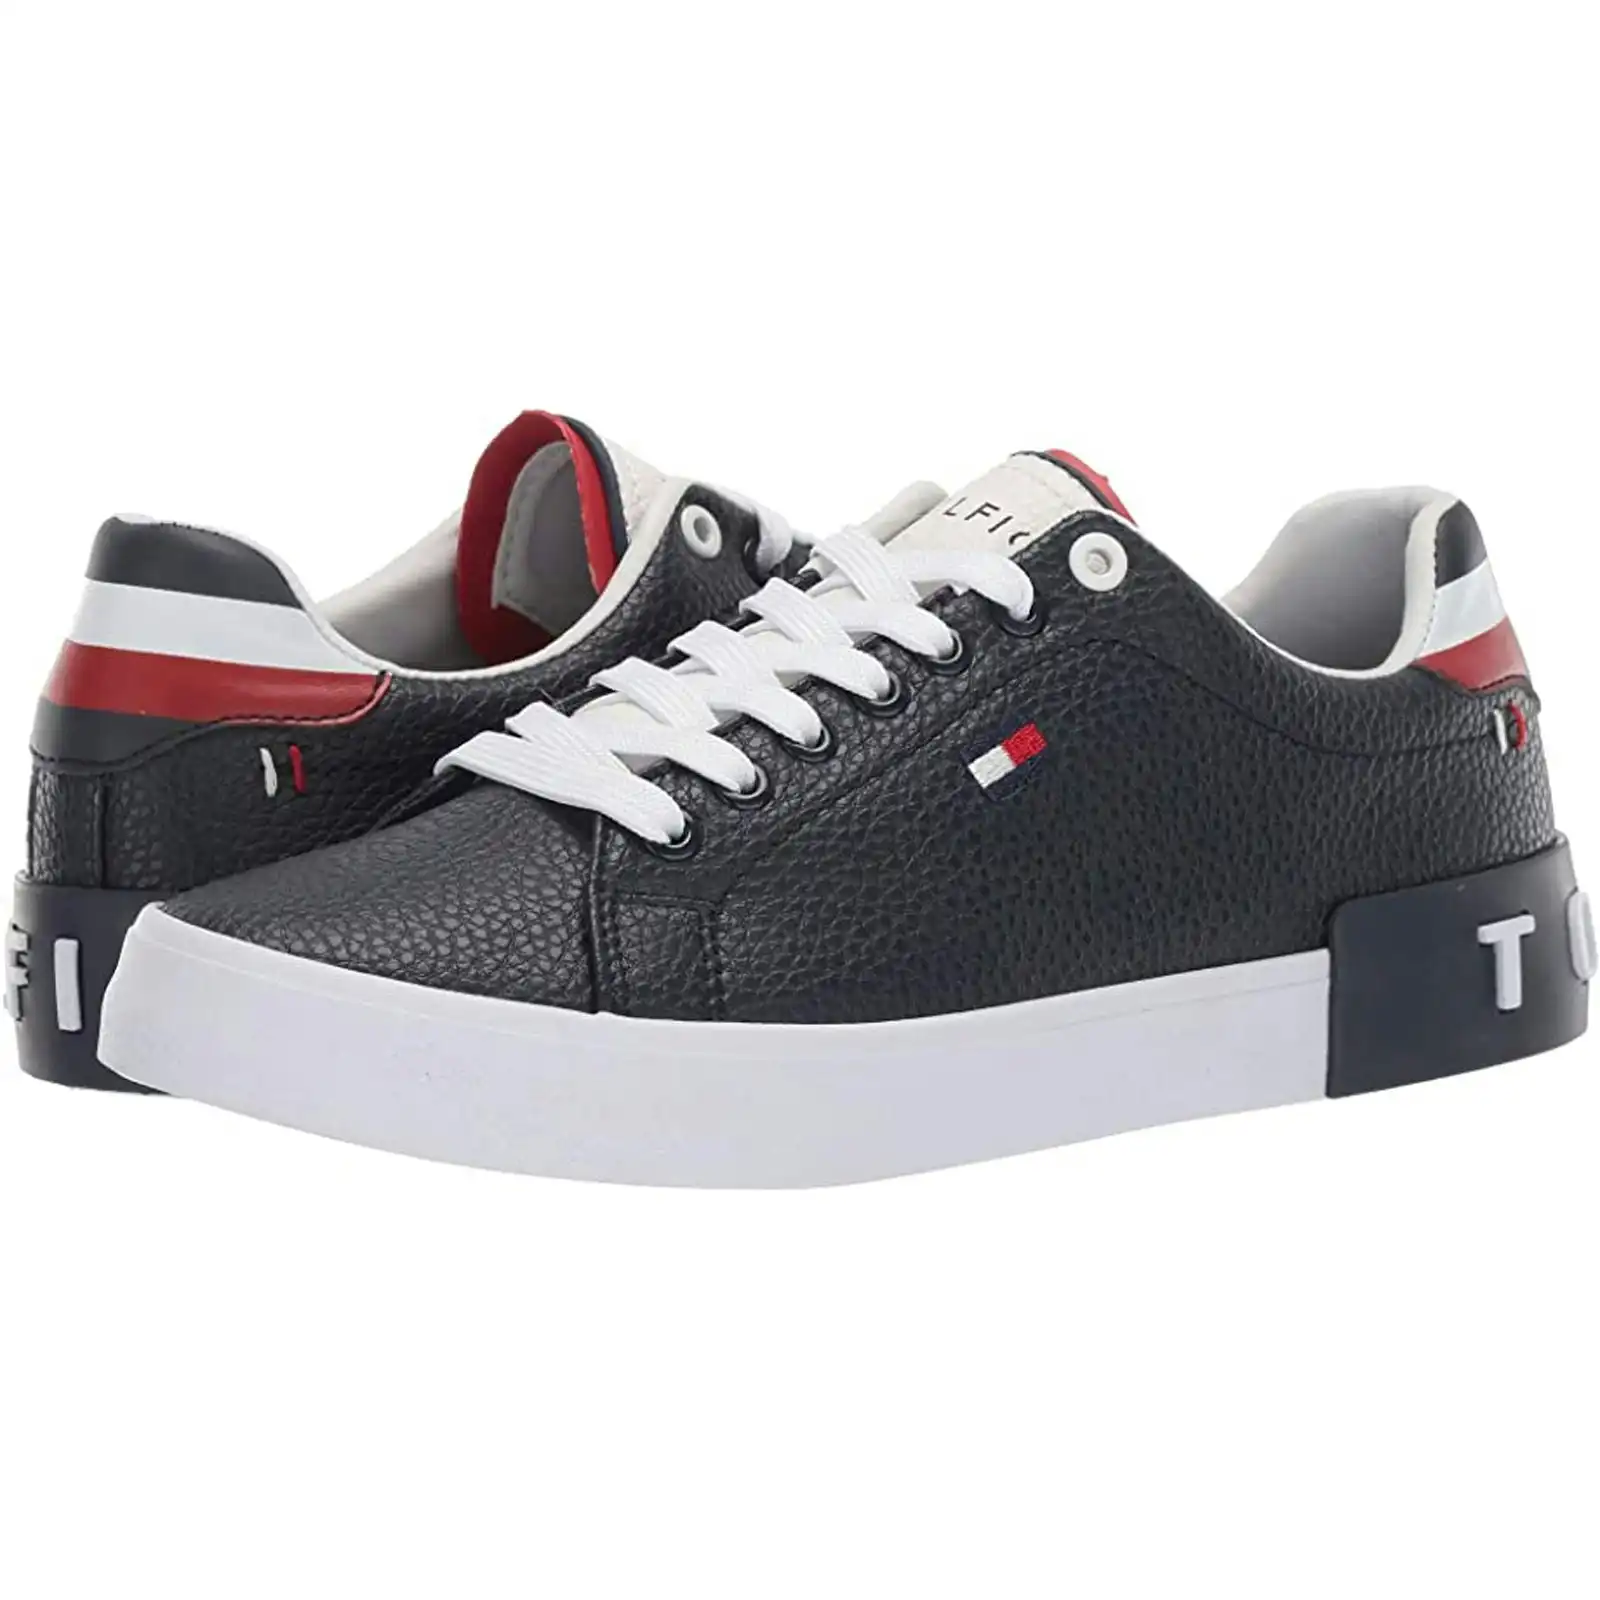 Tommy Hilfiger Shoes Sneakers Rezz Mens Casual Round Toe Brand New